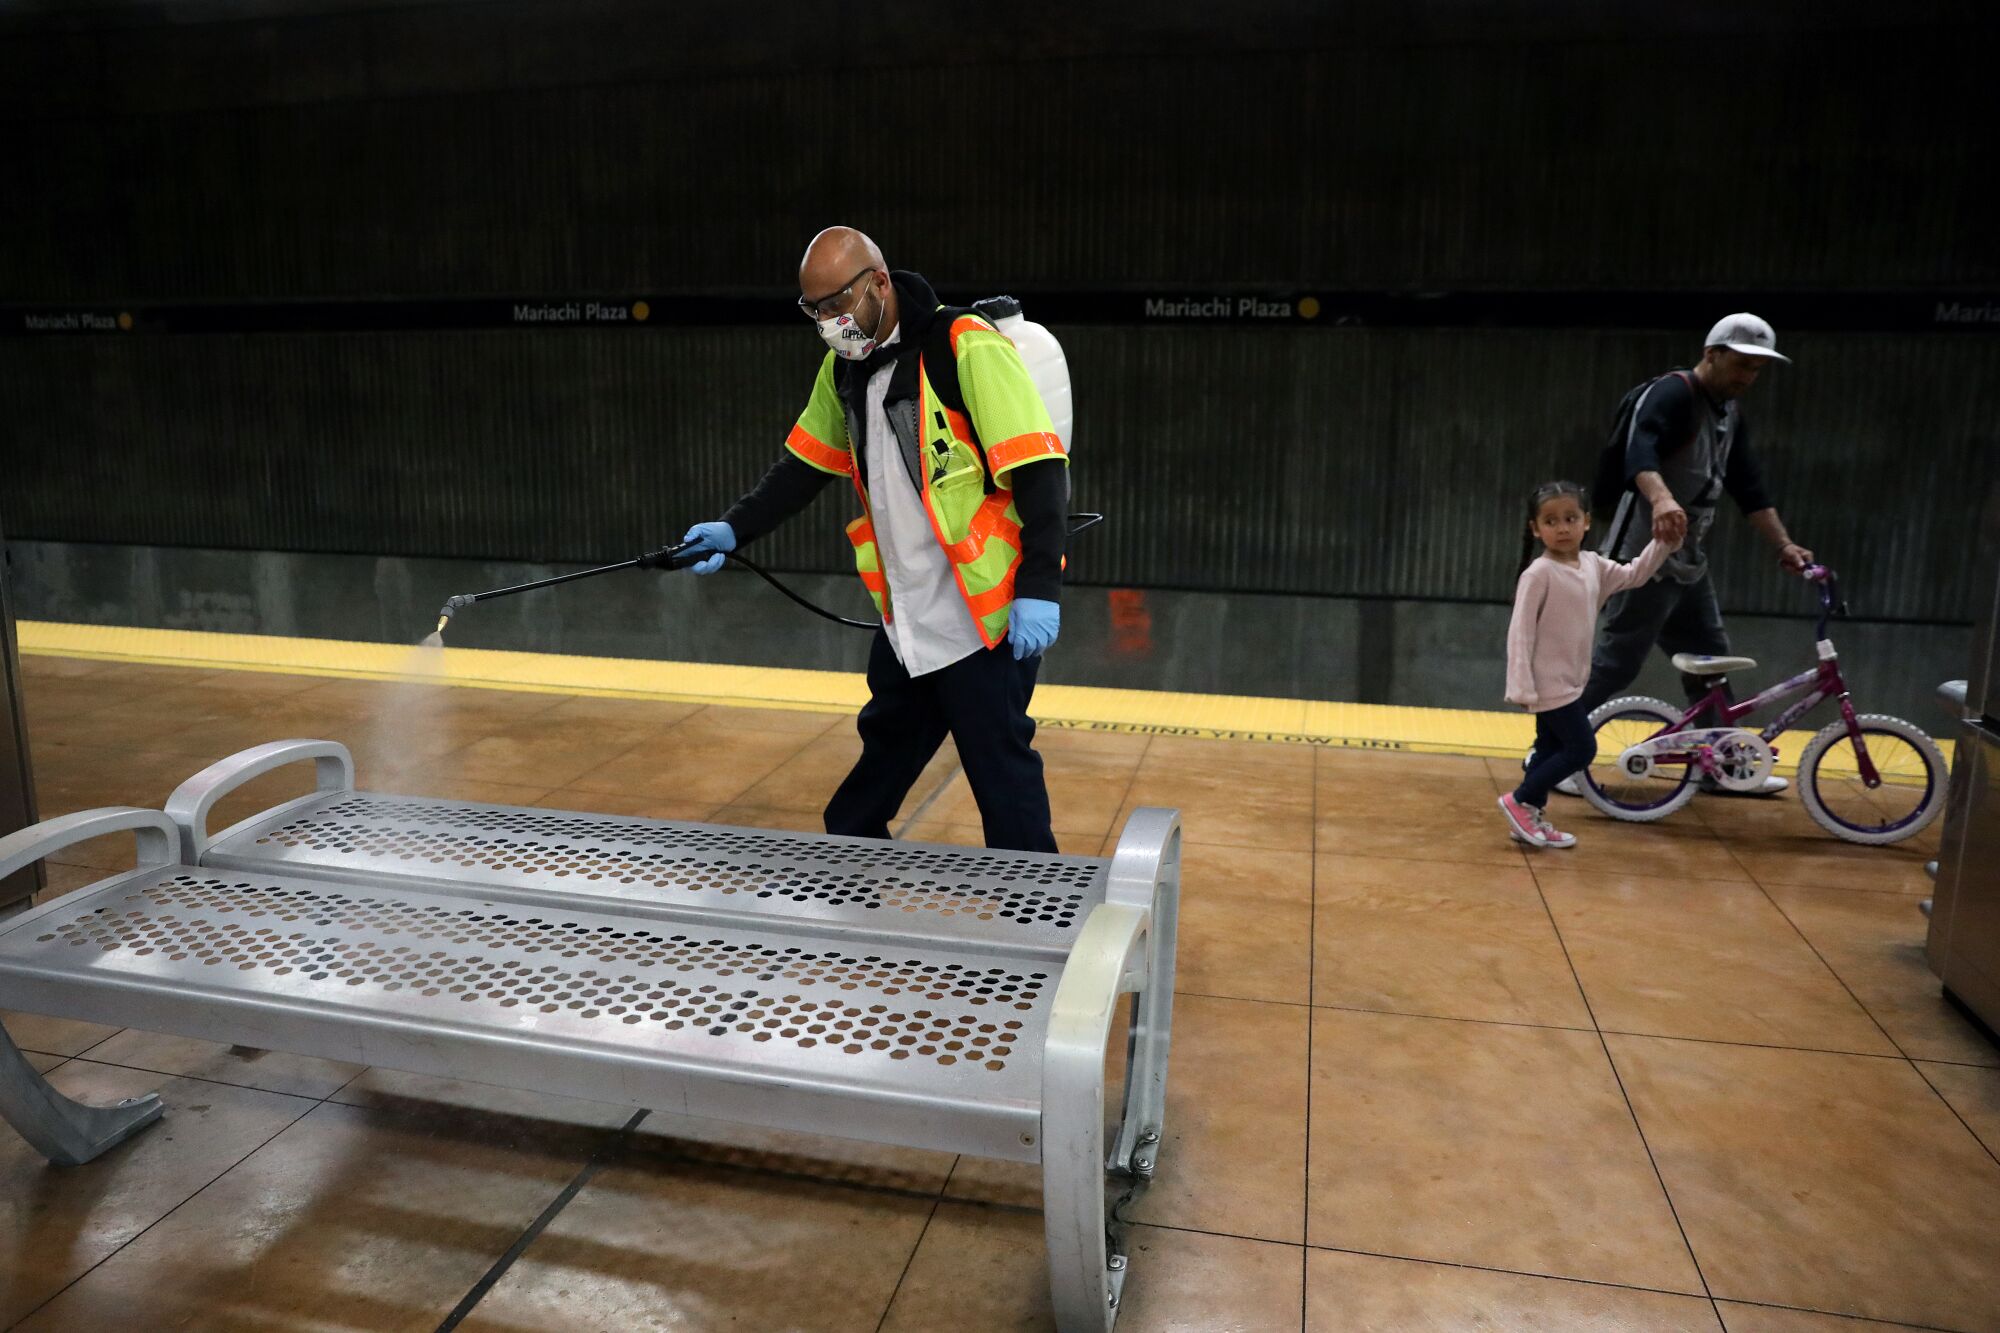 A Metro general service employee disinfects Mariachi Plaza station in Boyle Heights.